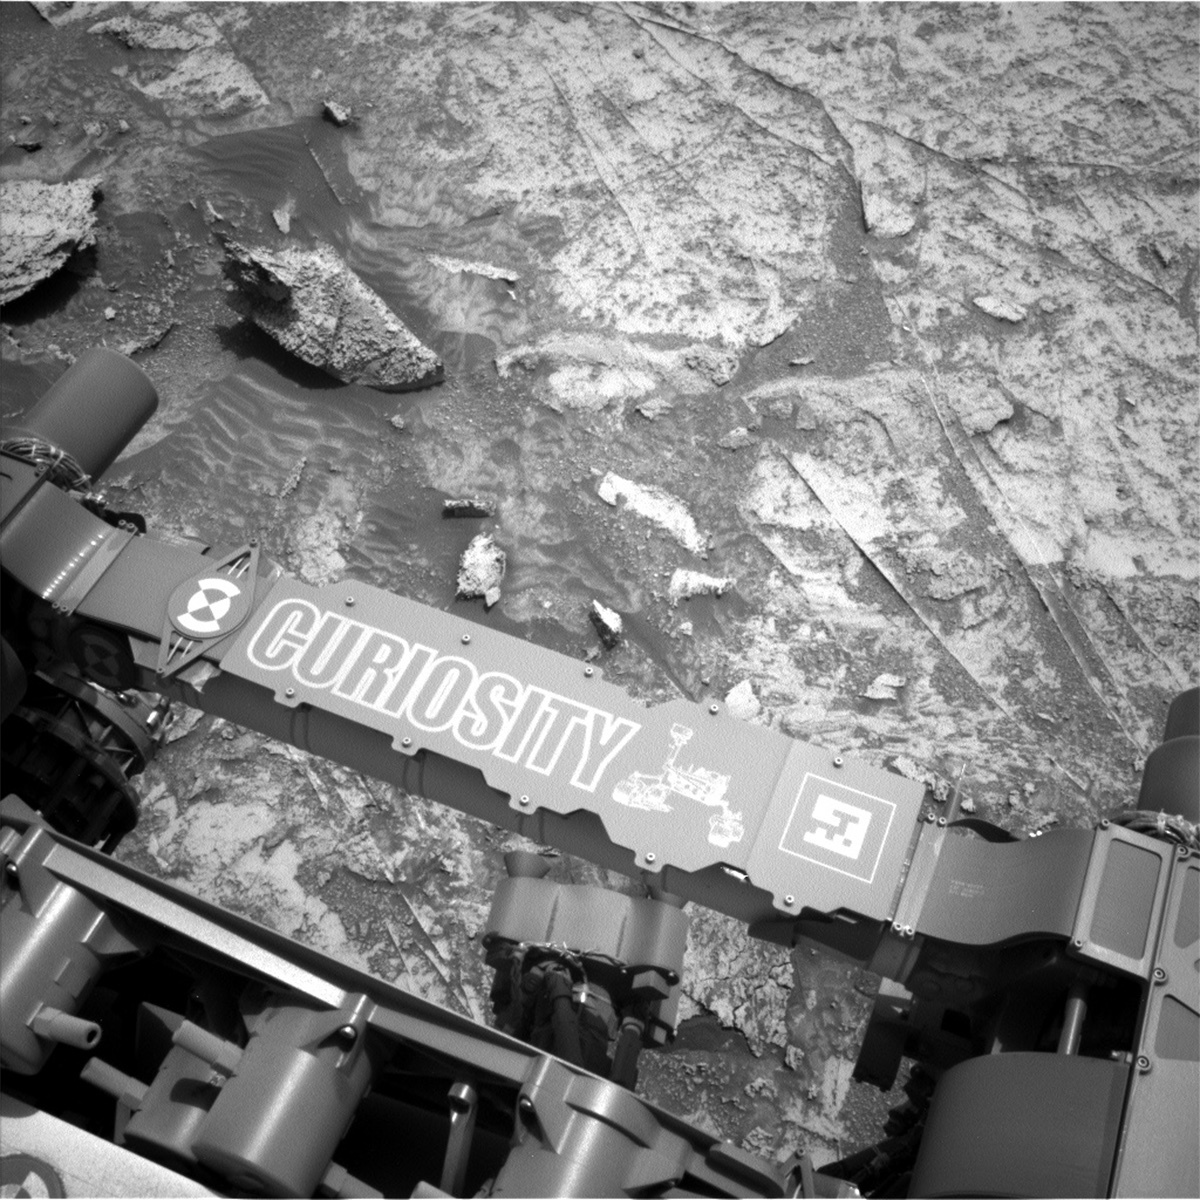 This image was taken by Curiosity's left Navigation camera on sol 3506, showing the large out of place target “Kukui" and "Curiosity" name plate on the rover.